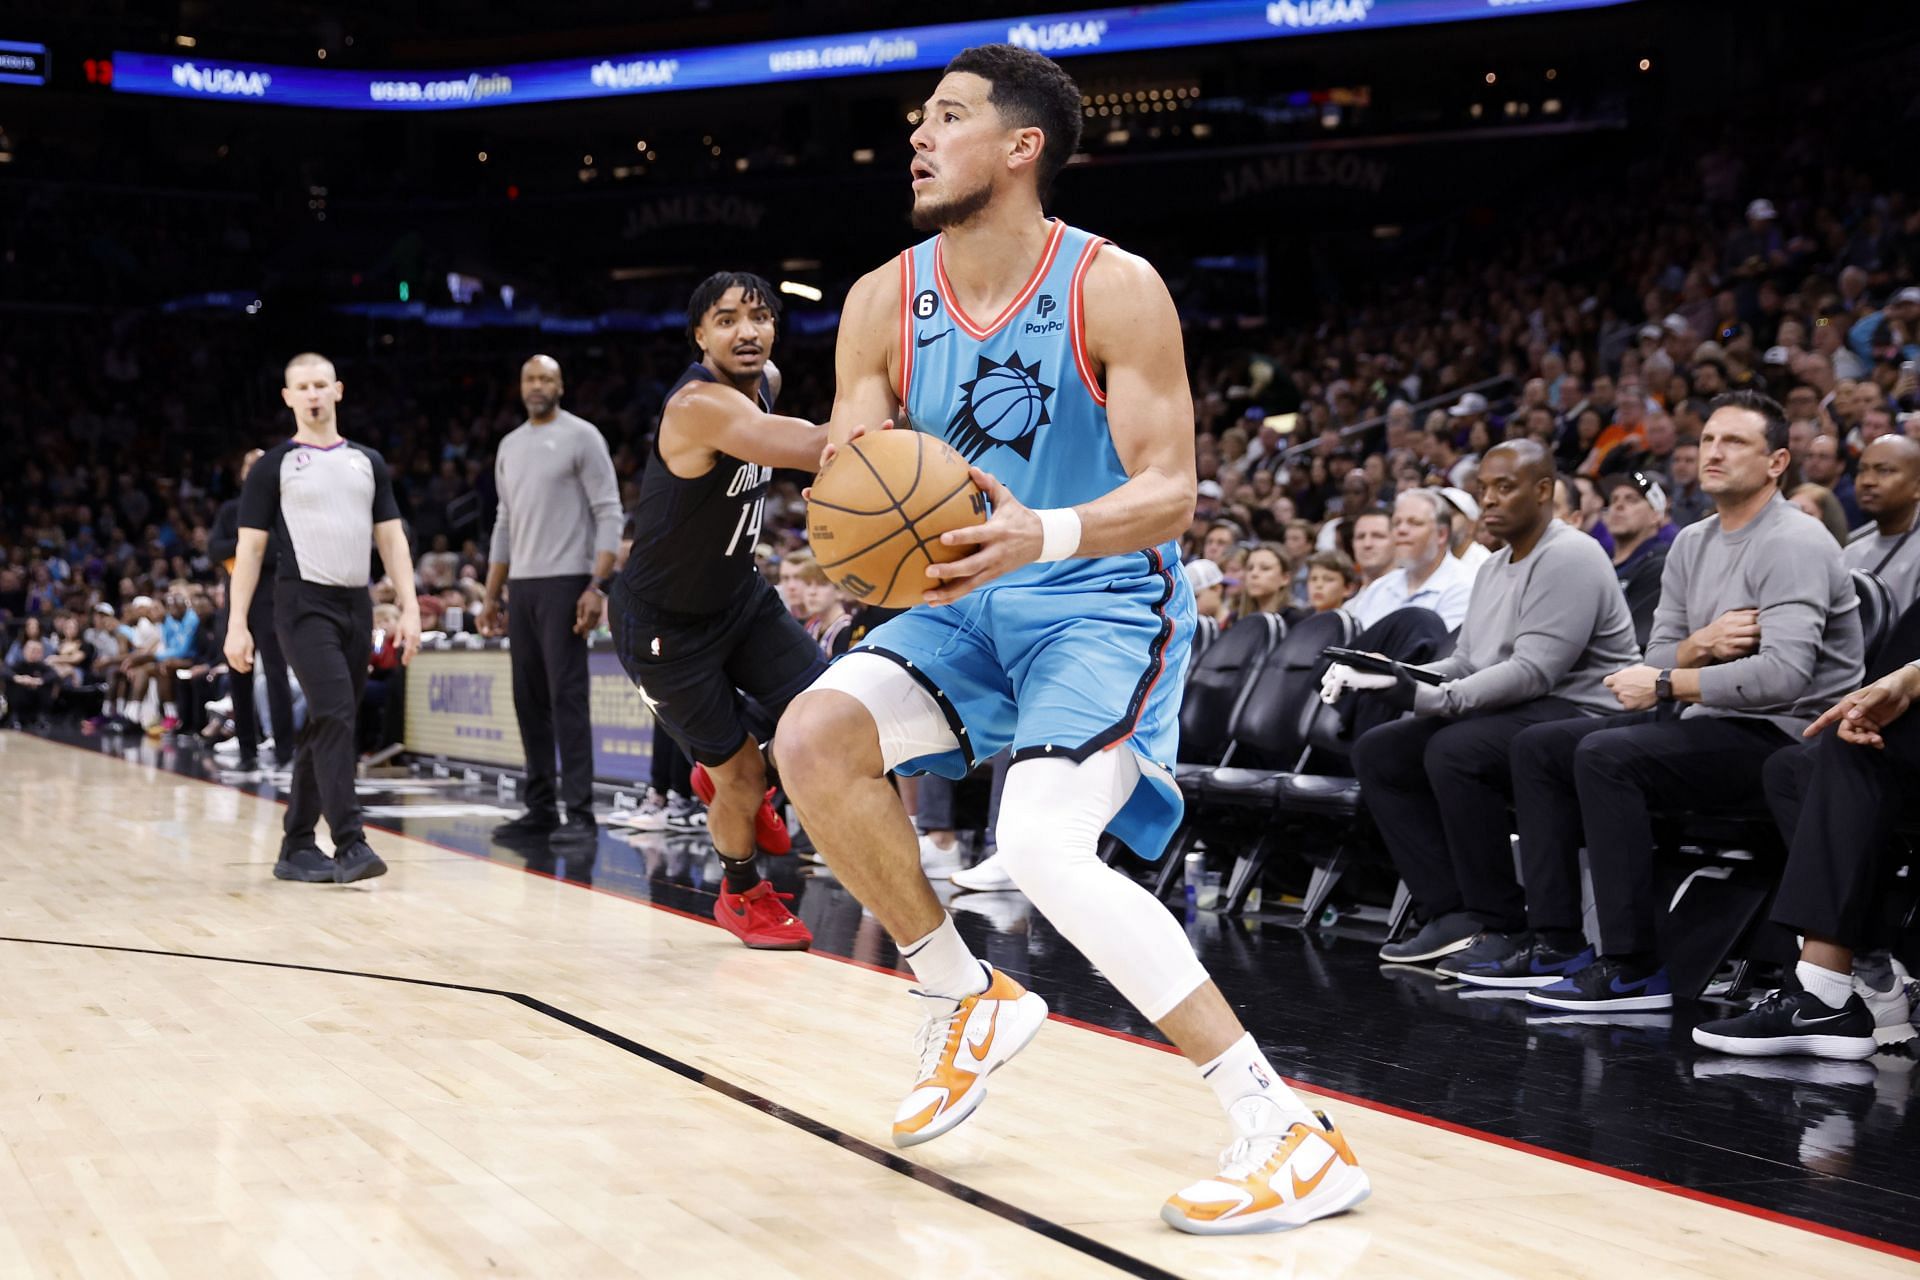 Why did Devin Booker call out Bad Bunny? Looking at details of